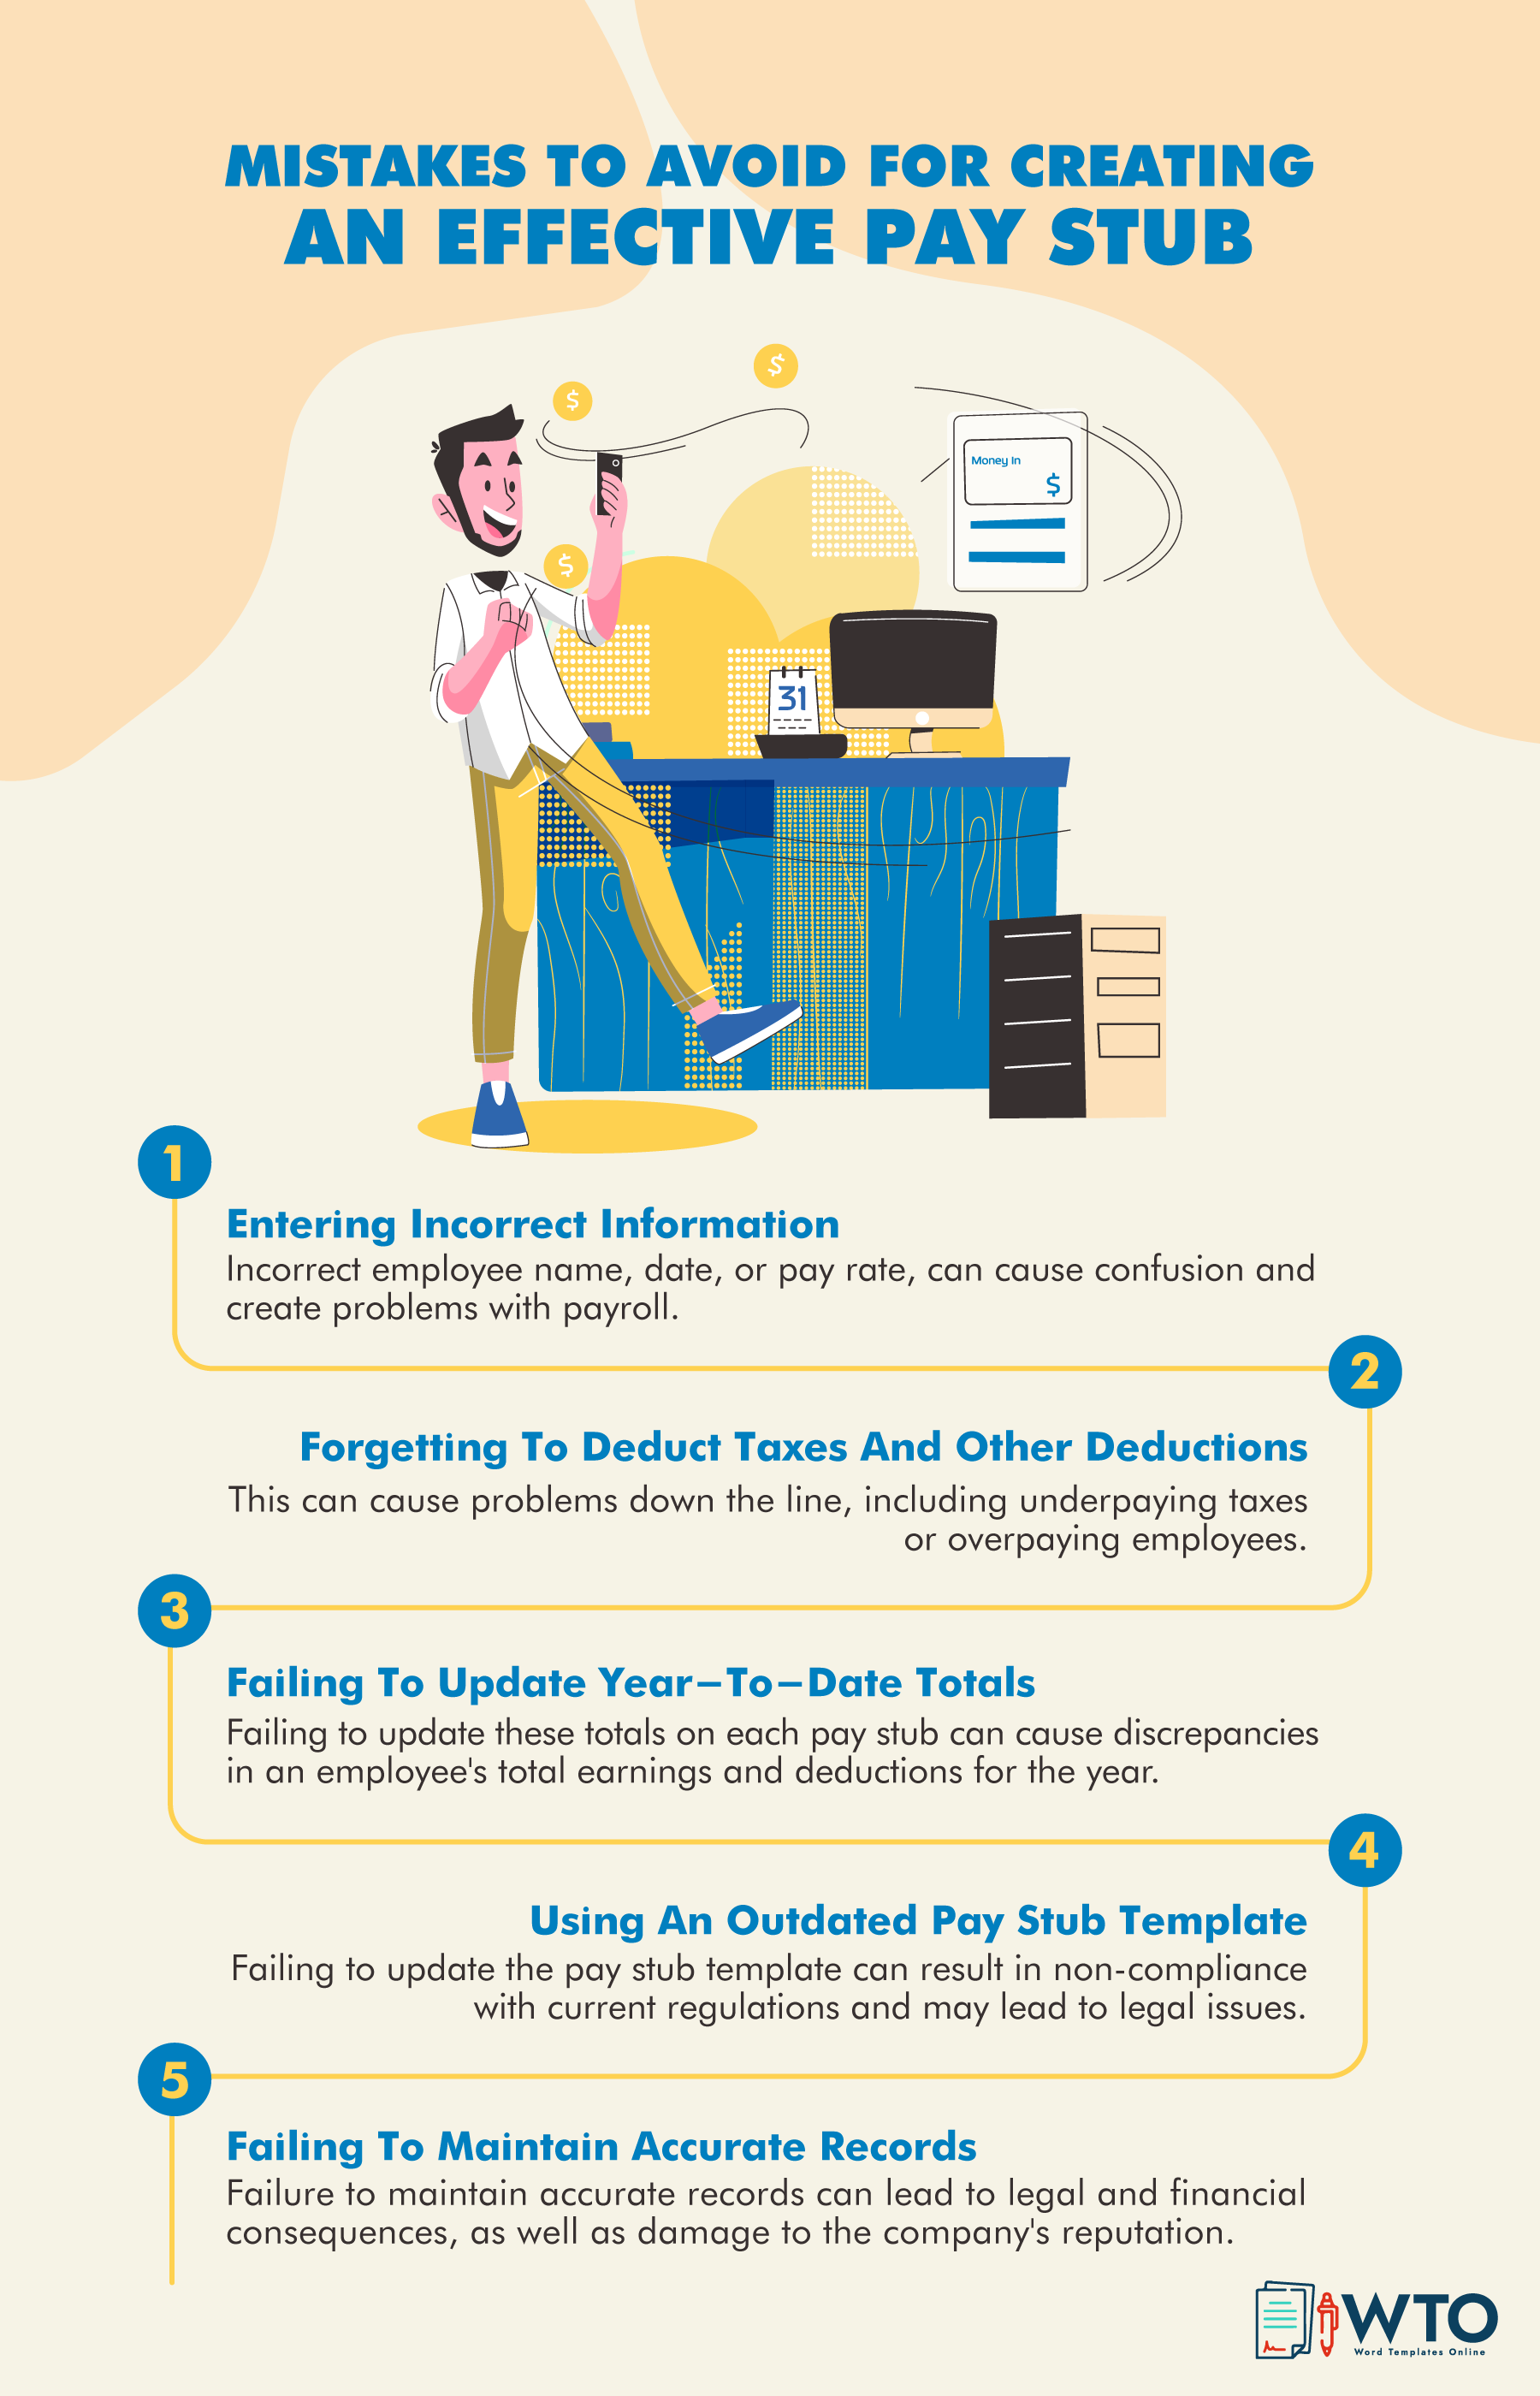 This infographic tells about the mistakes to avoid while creating an effective pay stub.